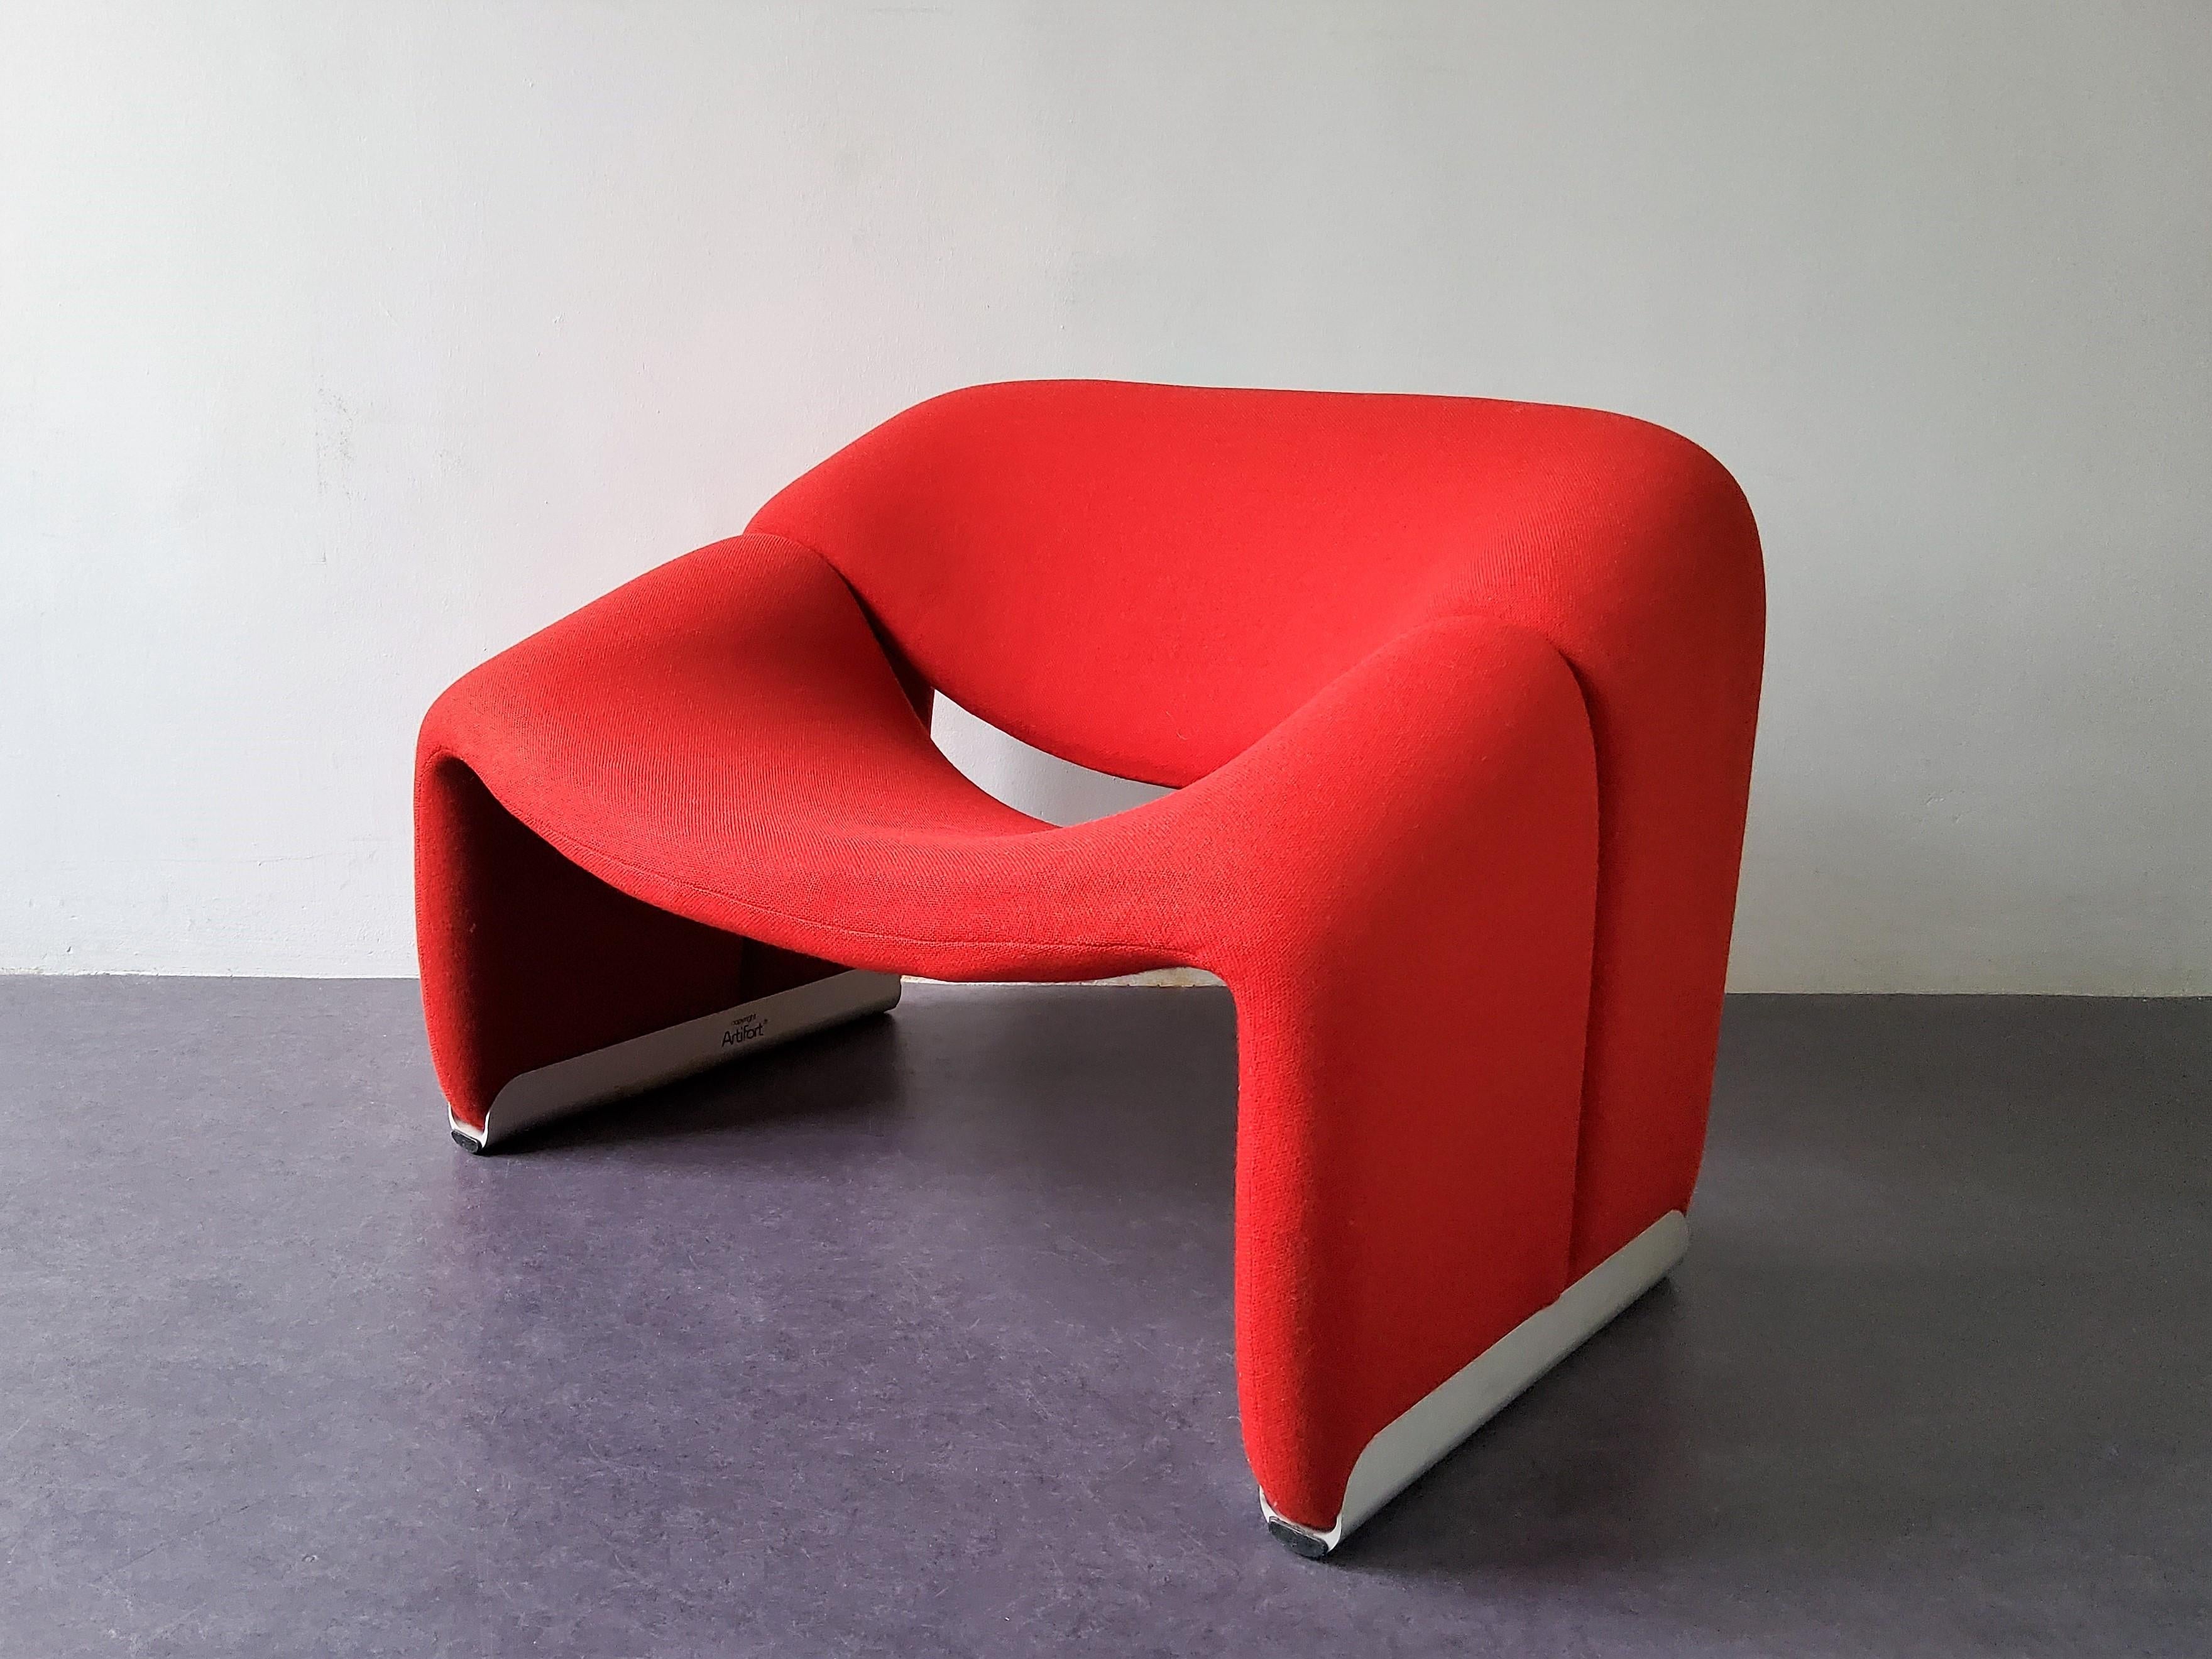 The 'Groovy' or 'M-chair' shell seat, model F598, was designed by Pierre Paulin for Artifort in 1973. It is a timeless and beautiful design that still finds great demand. This chair is in a good, but vintage condition with signs of age and use to